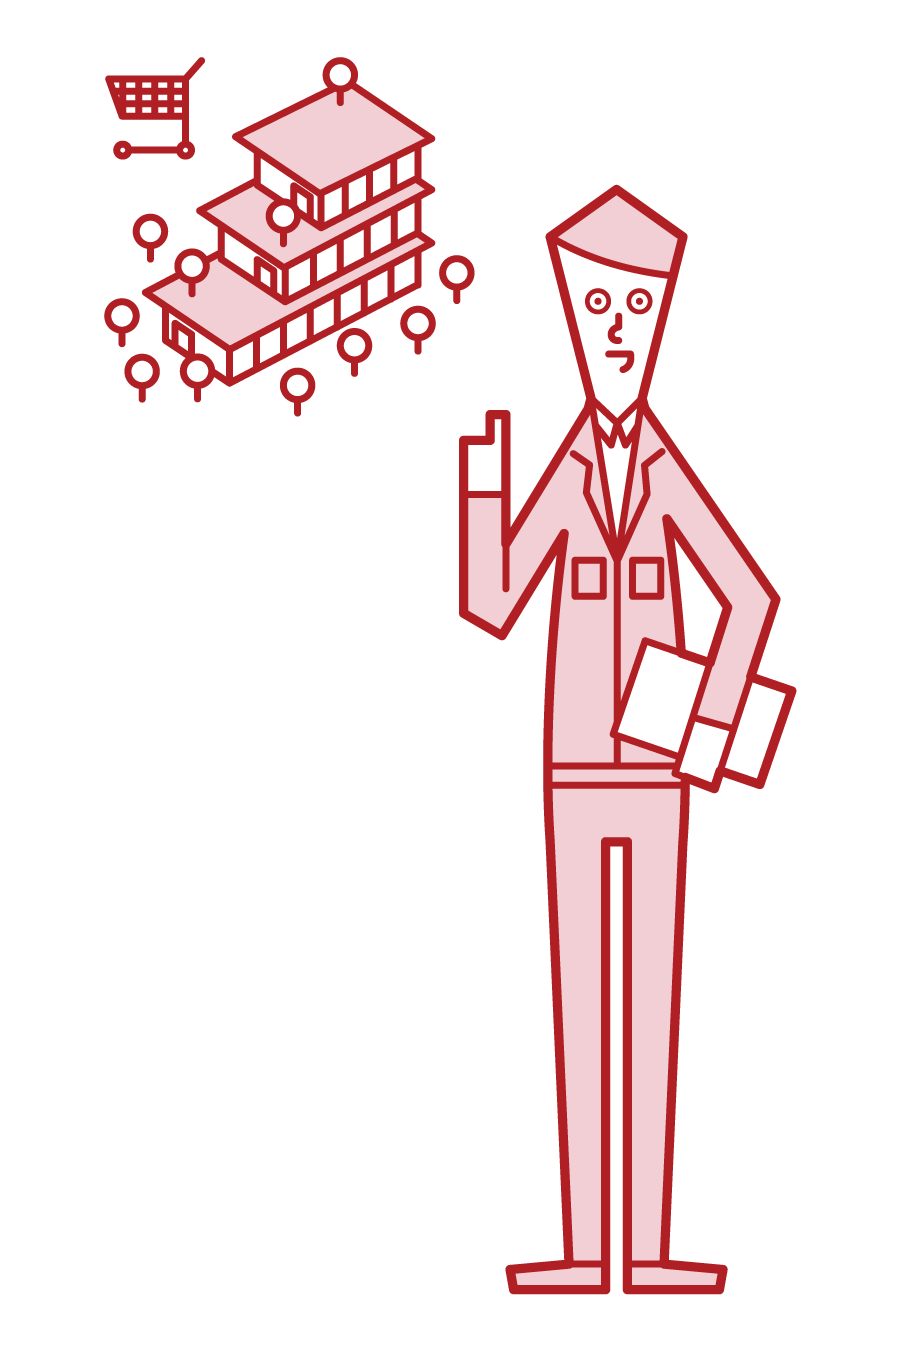 Illustration of a commercial facility worker (man)